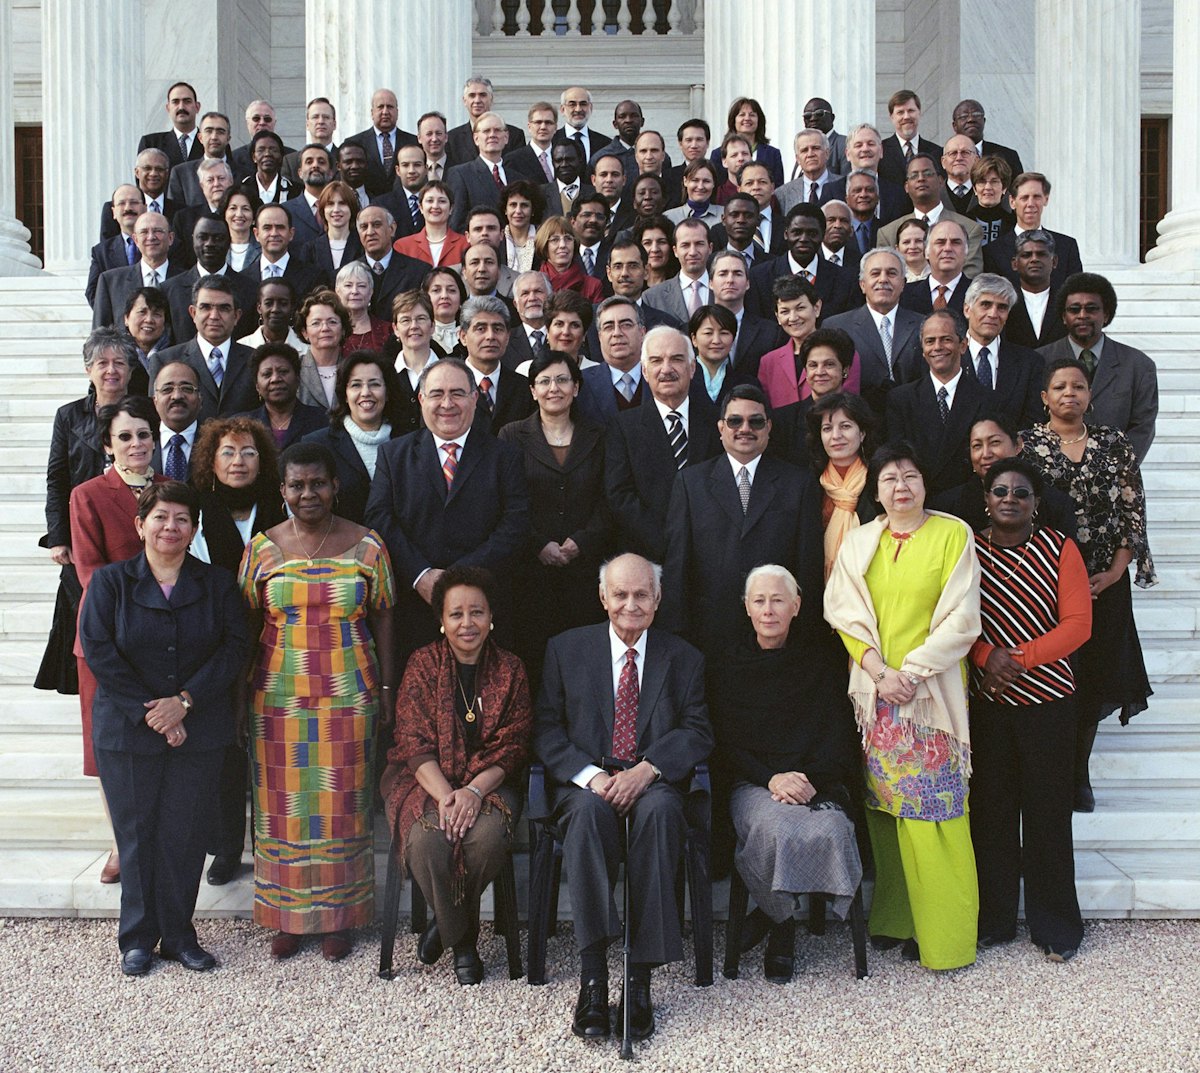 Dr. Varqa is at the front in this photograph taken at the Counsellors' conference in Haifa on 28 December 2005. Also pictured are the members of the Universal House of Justice and the members of the Continental Boards of Counsellors and the International Teaching Center.